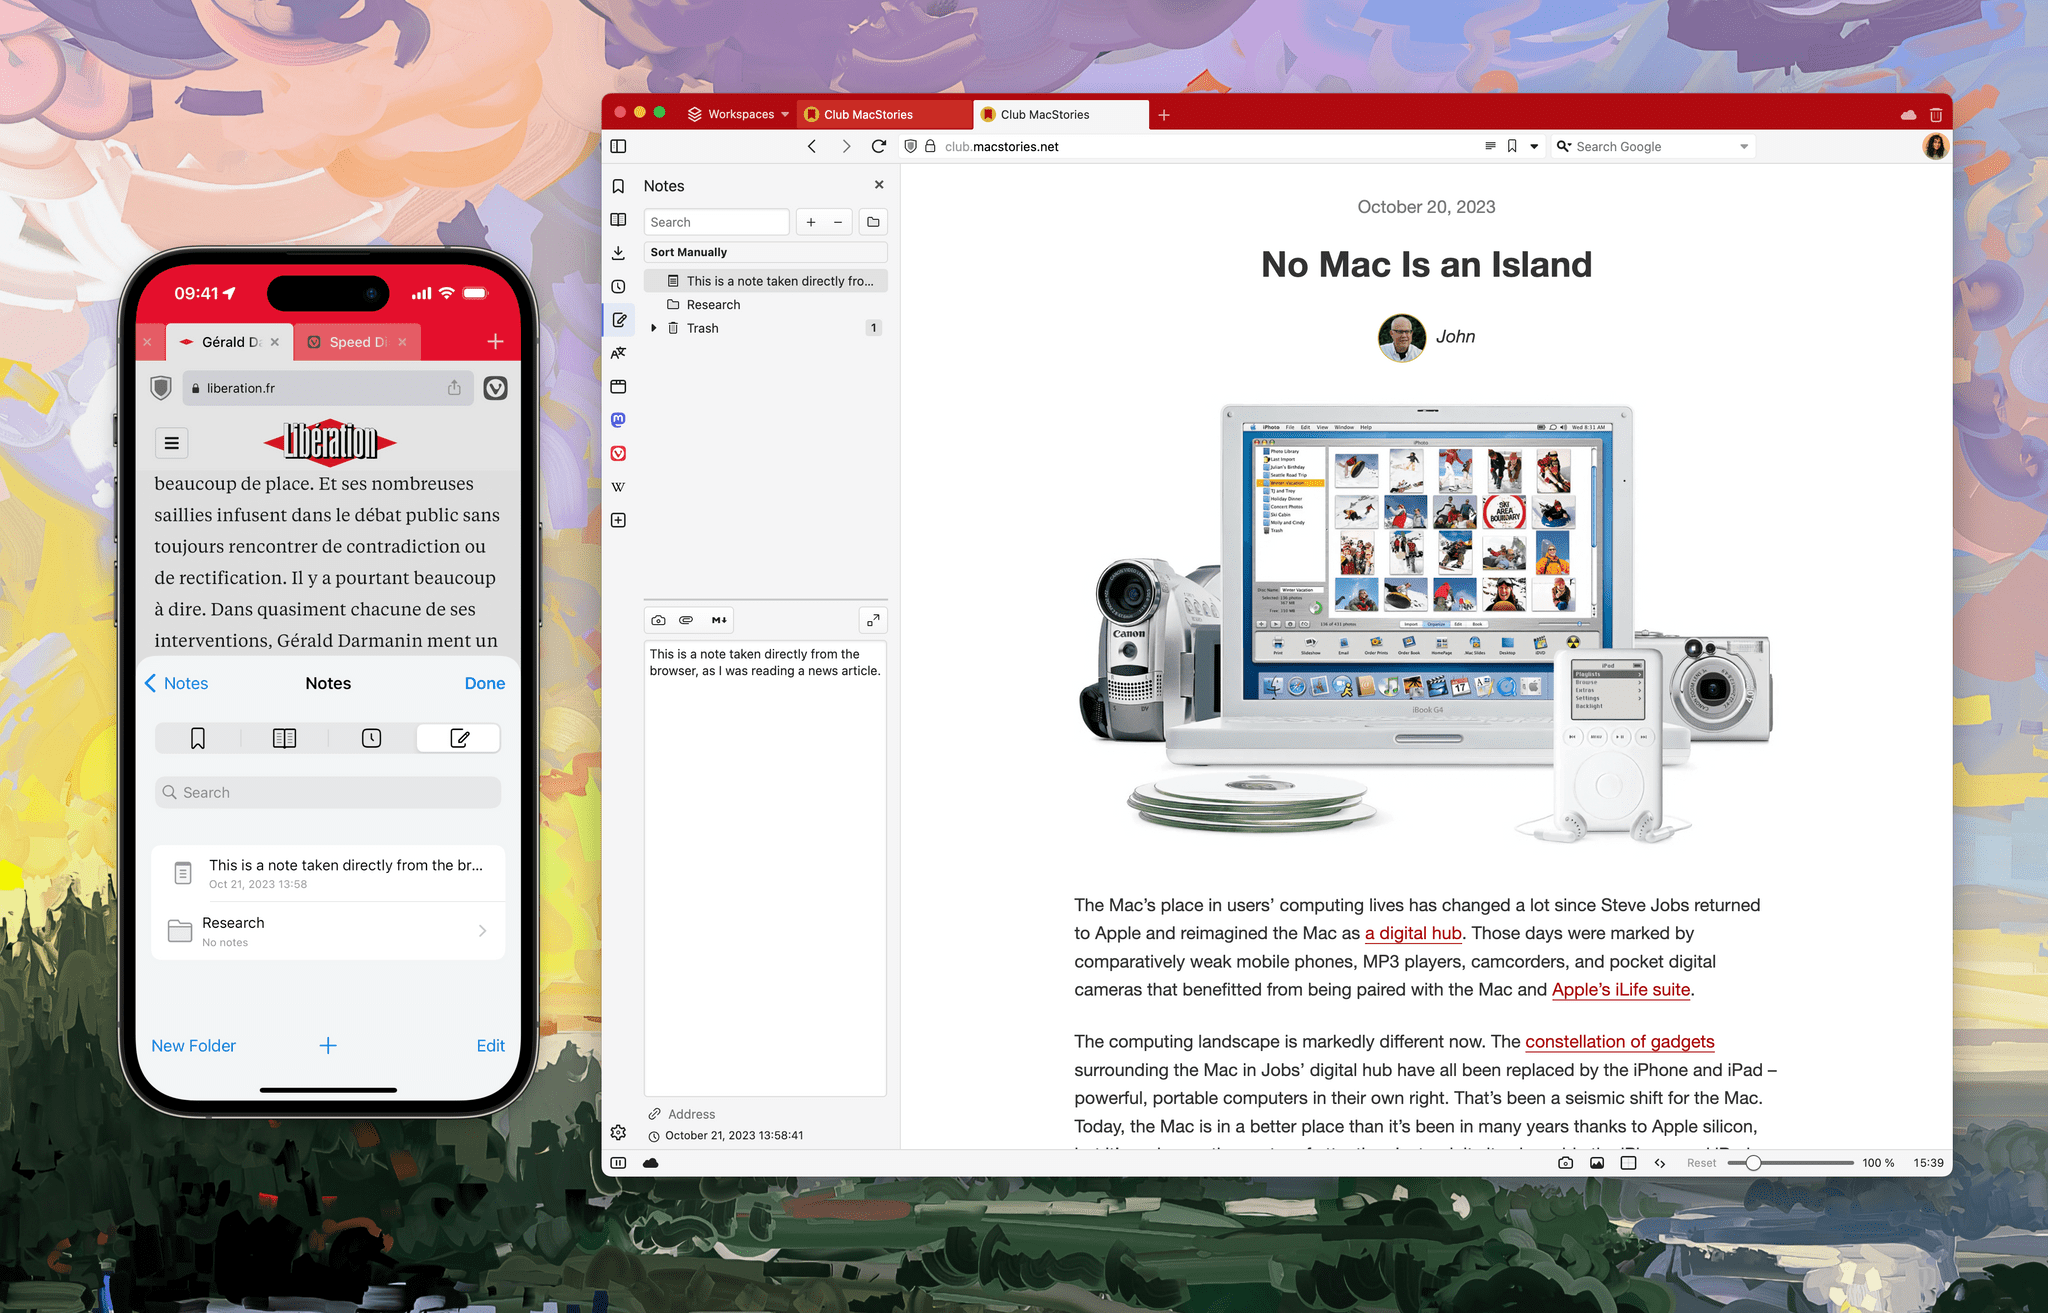 You can directly take notes from Vivaldi on iOS, and they will sync to Vivaldi on your Mac.